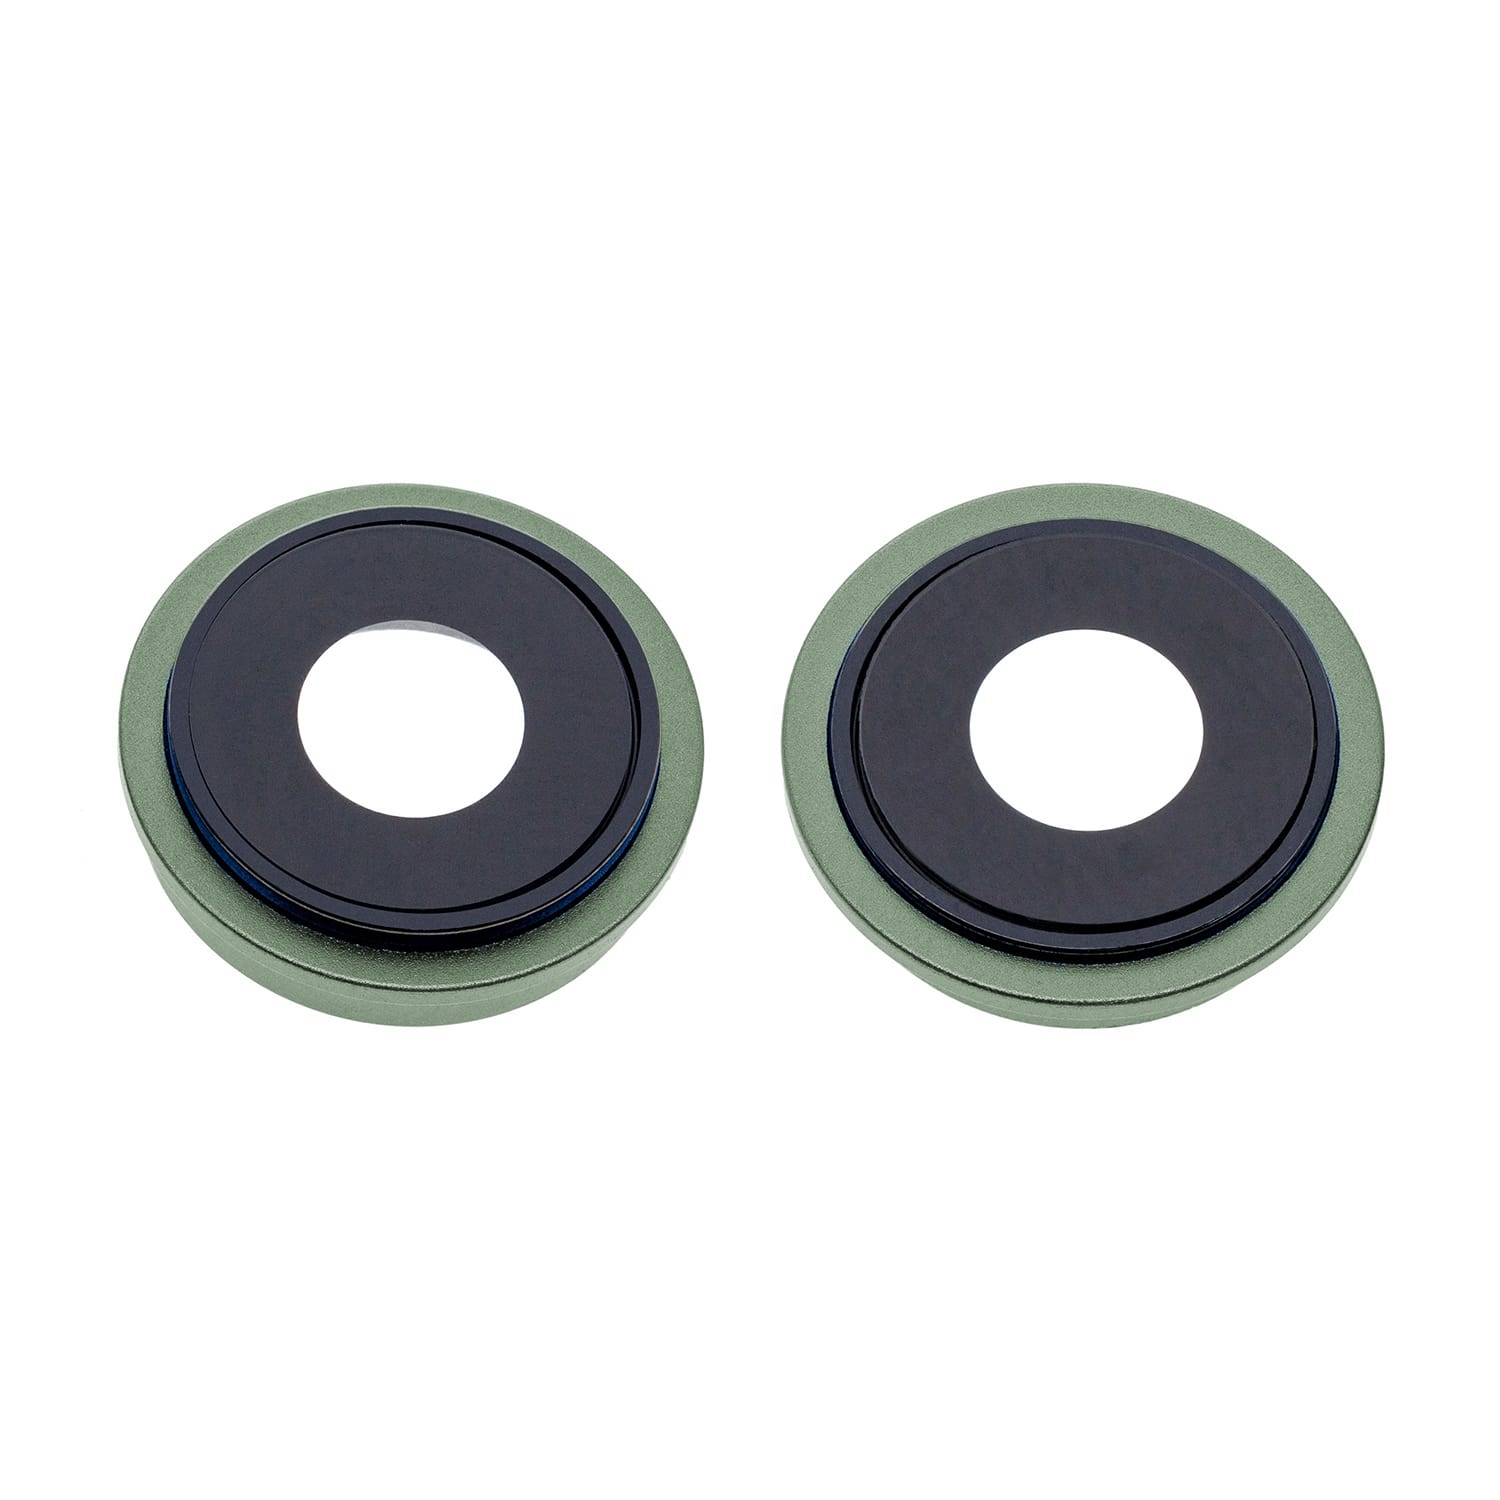 REAR CAMERA HOLDER WITH LENS FOR IPHONE 13/13 MINI - ALPINE GREEN